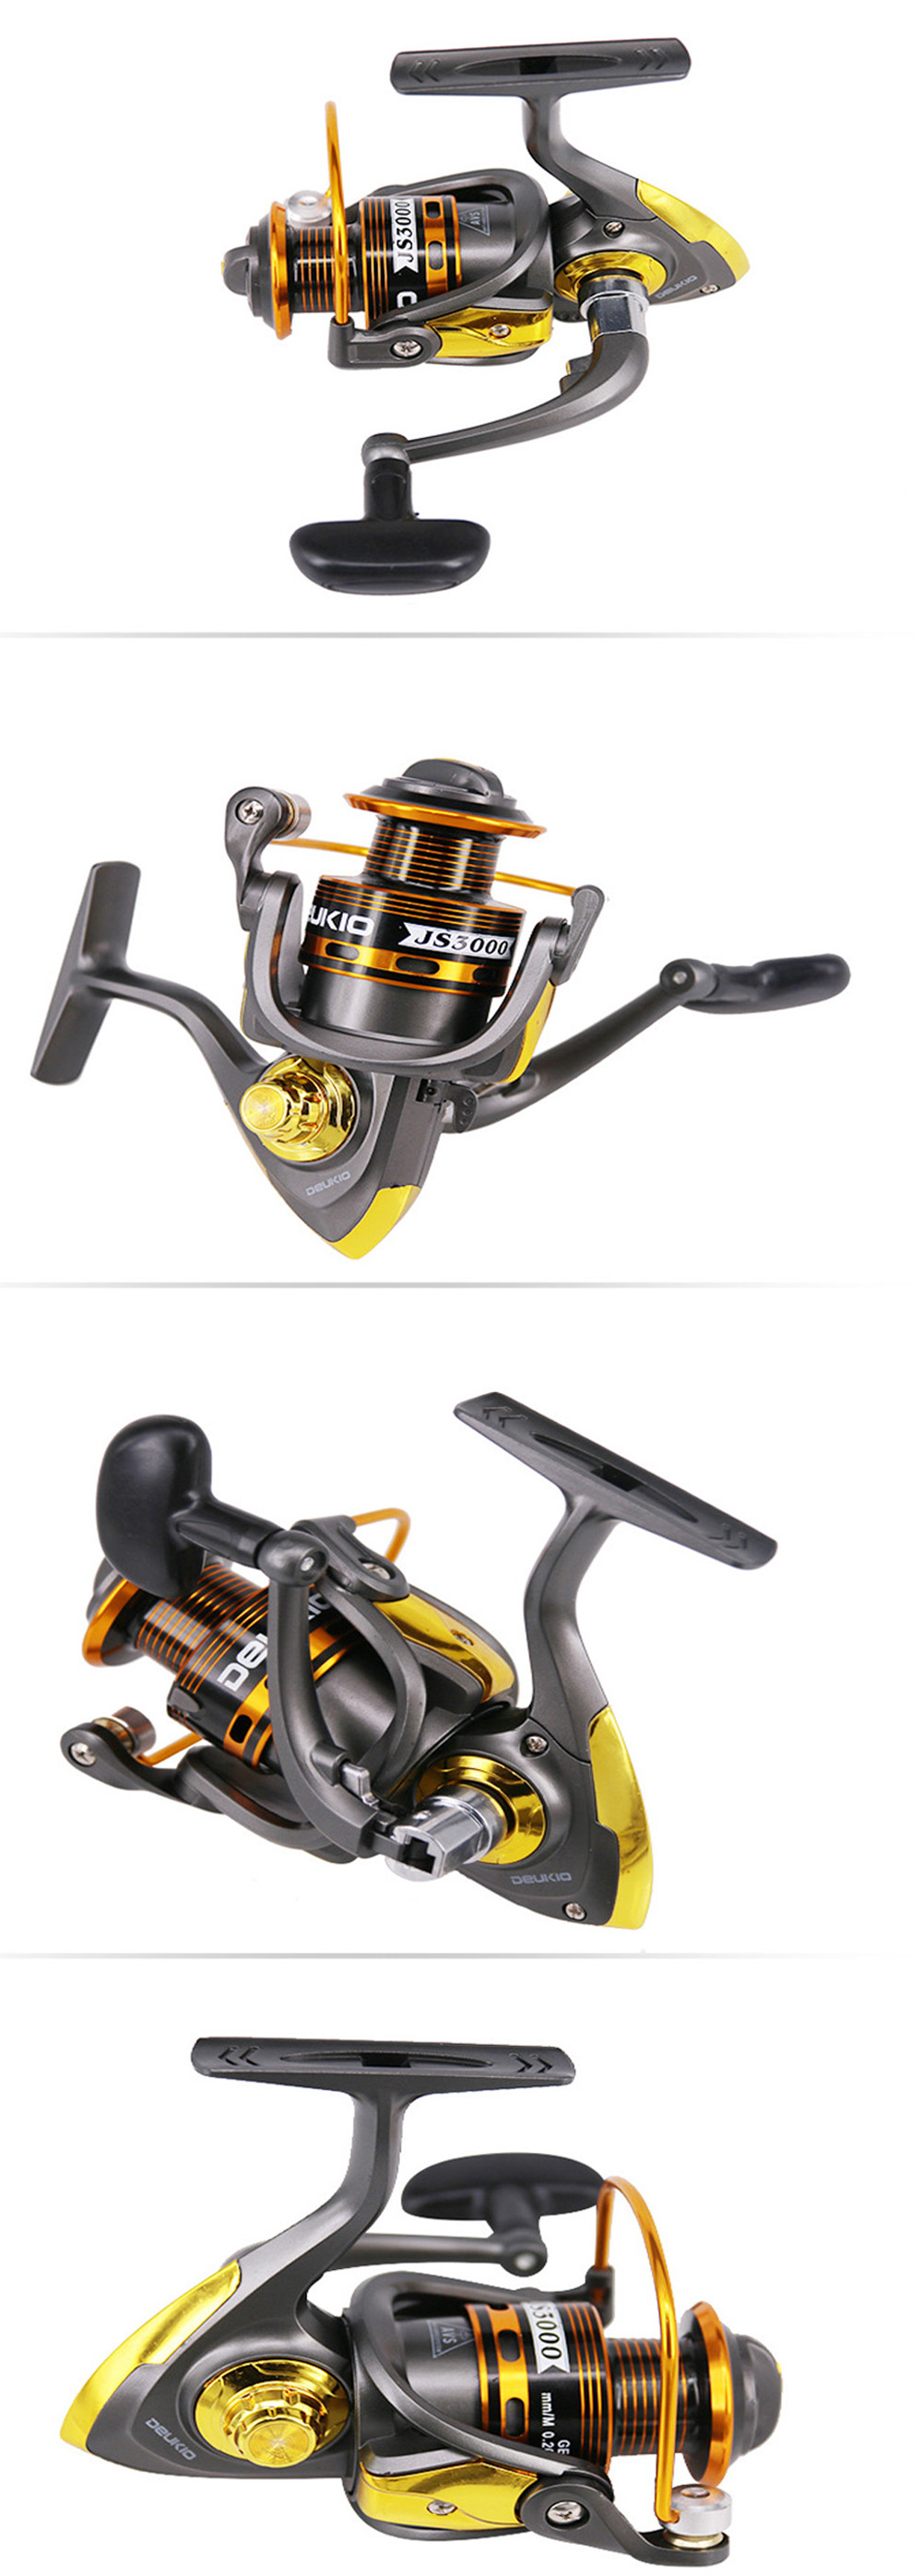 DEUKIO-521-Speed-Braking-Force-Fish-Reel-Spinning-Wheel-Aluminum-Alloy-Can-Be-Folded-Left-And-Right--1842489-2